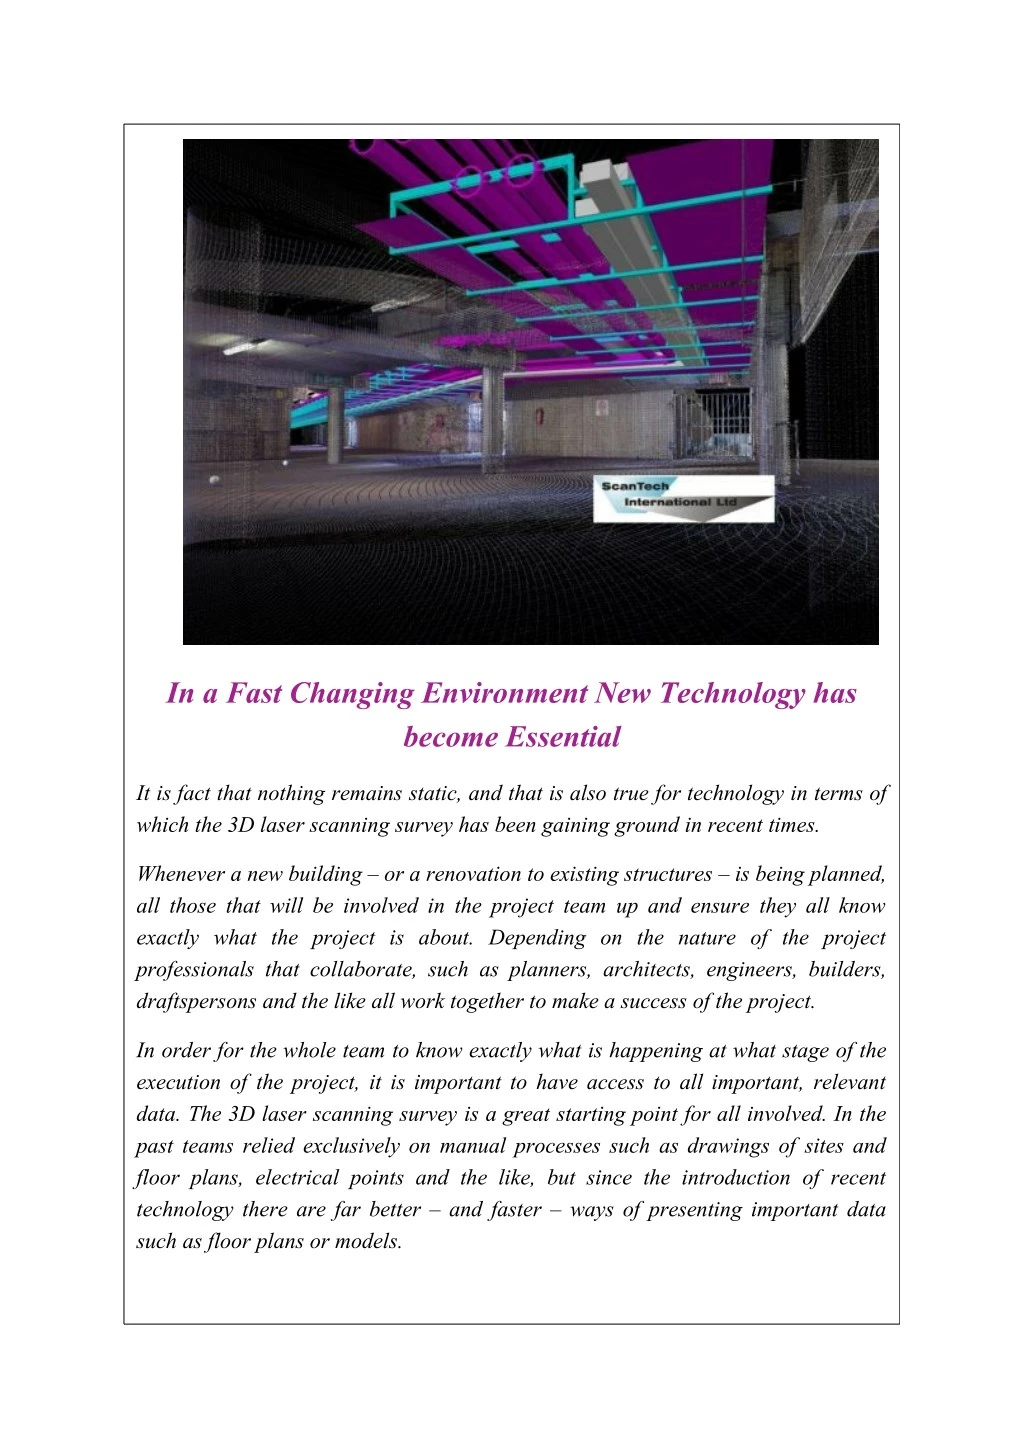 in a fast changing environment new technology